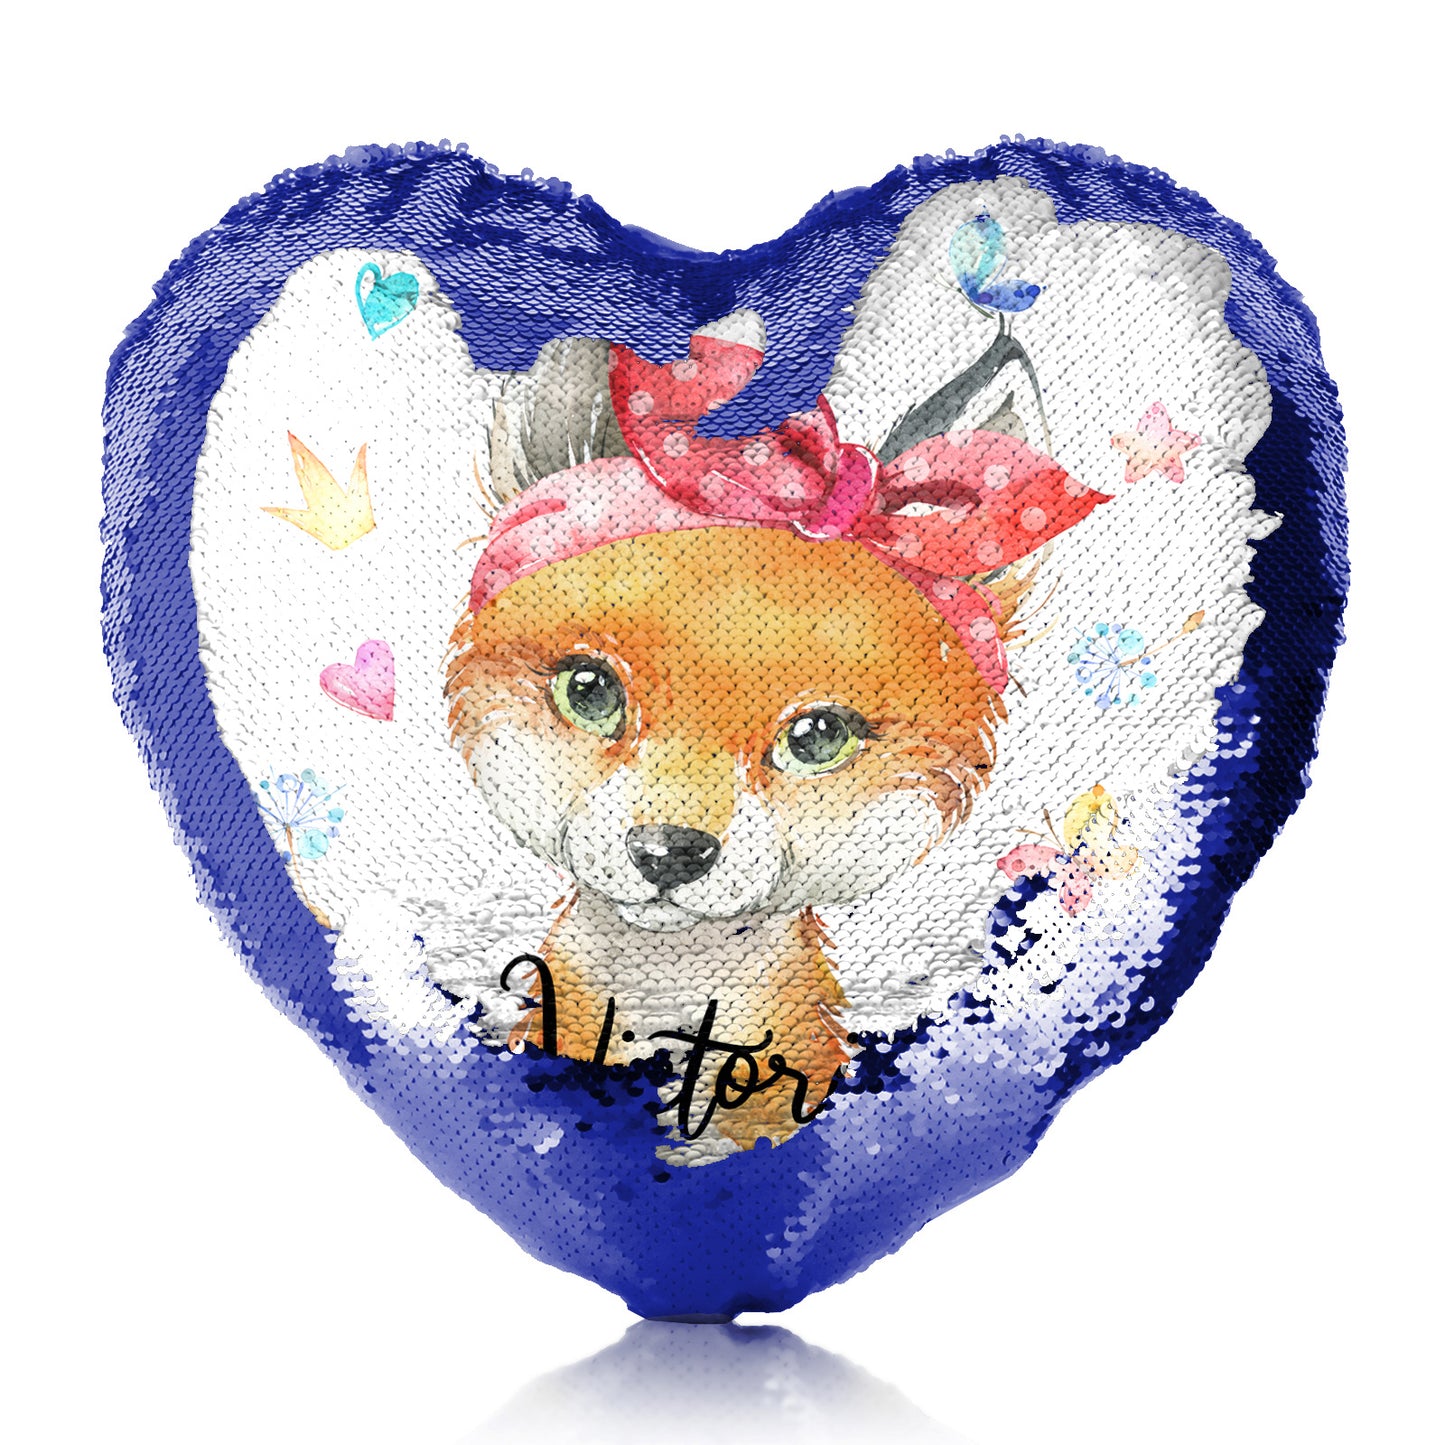 Personalised Sequin Heart Cushion with Red Fox with Hearts Dandelion Butterflies and Cute Text